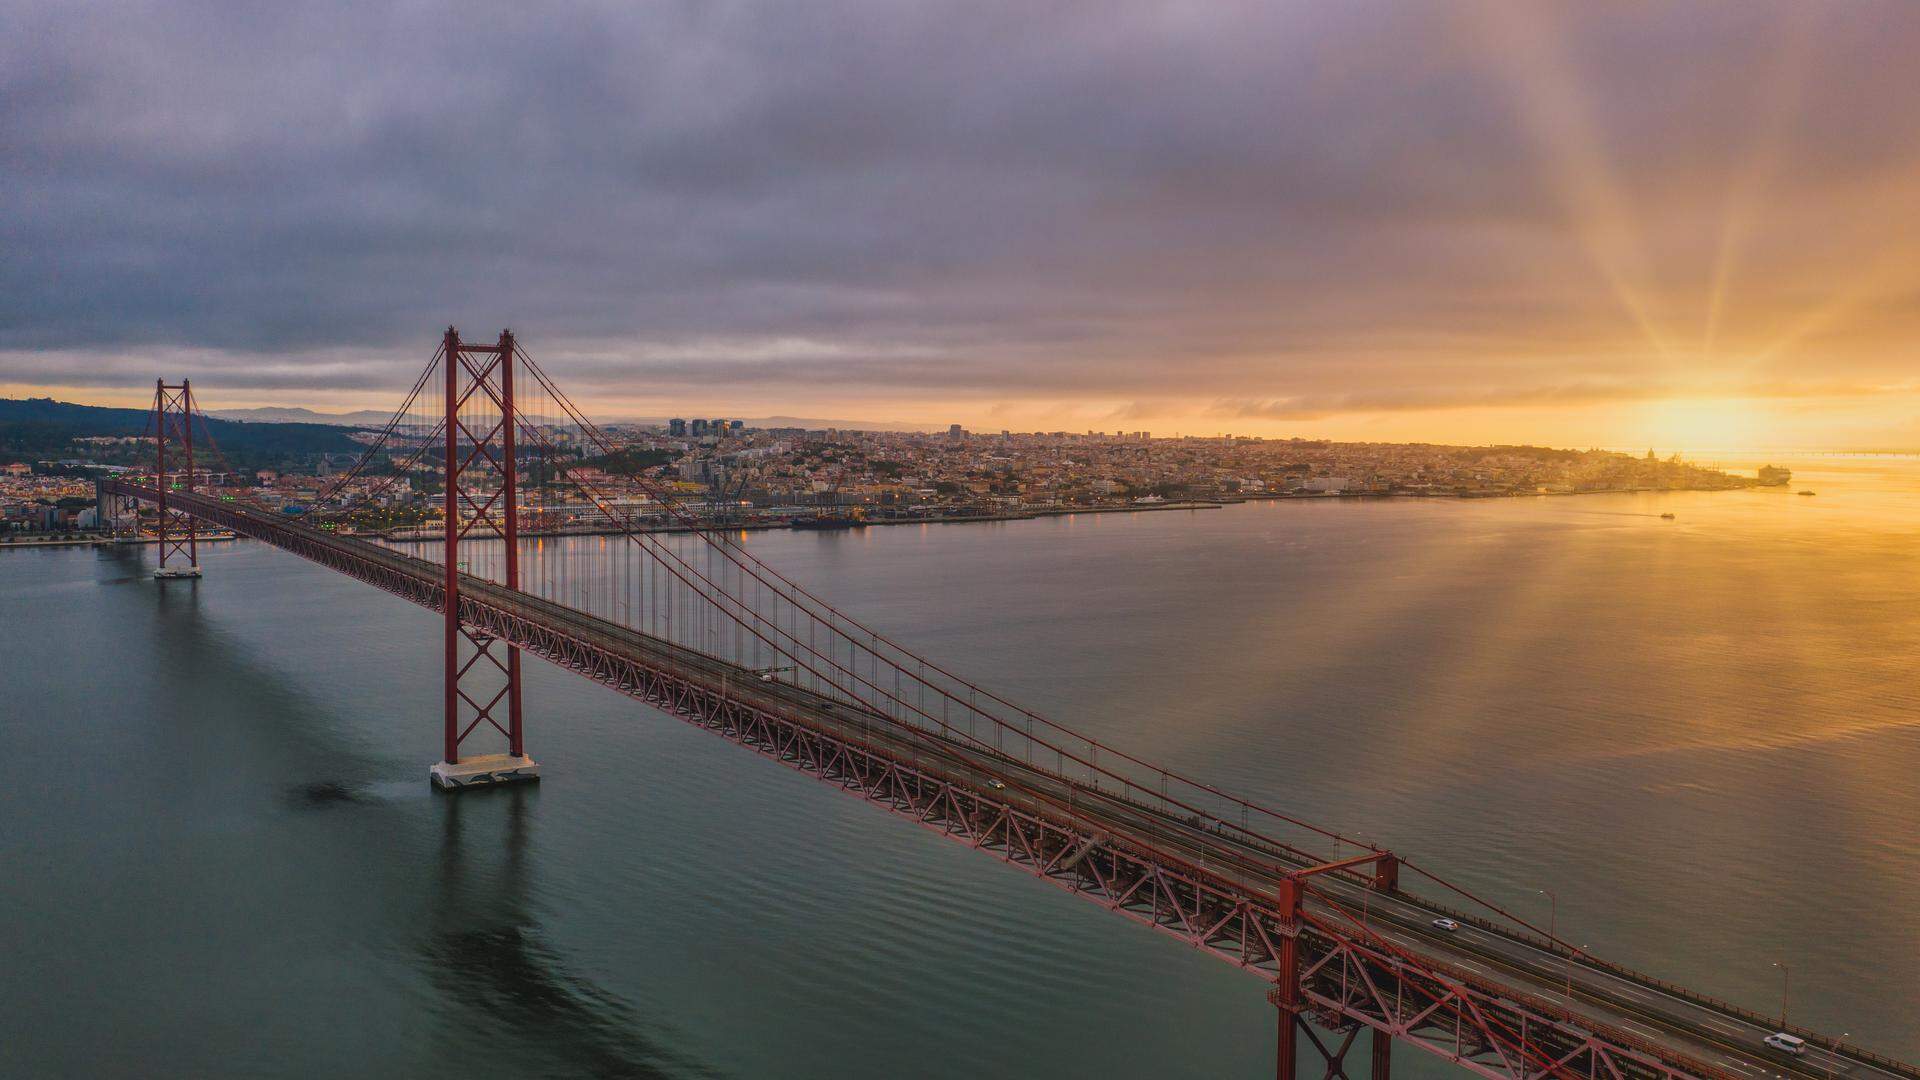 An aerial view shot of a suspension bridge in Portugal during a beautiful sunset, Lisbon, Lisboa